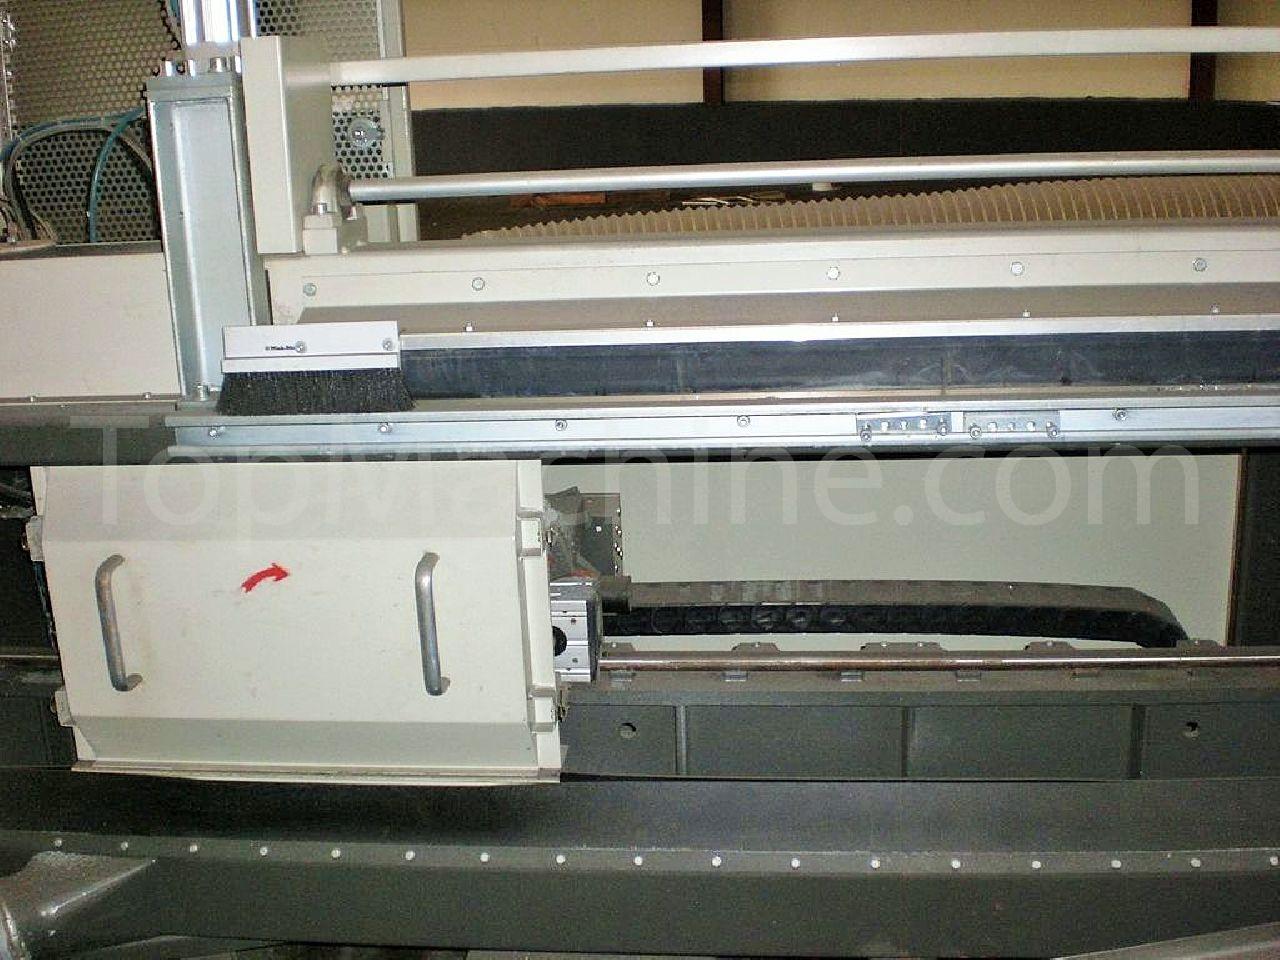 Used Greiner PT 1.400 Extrusion Profile saw